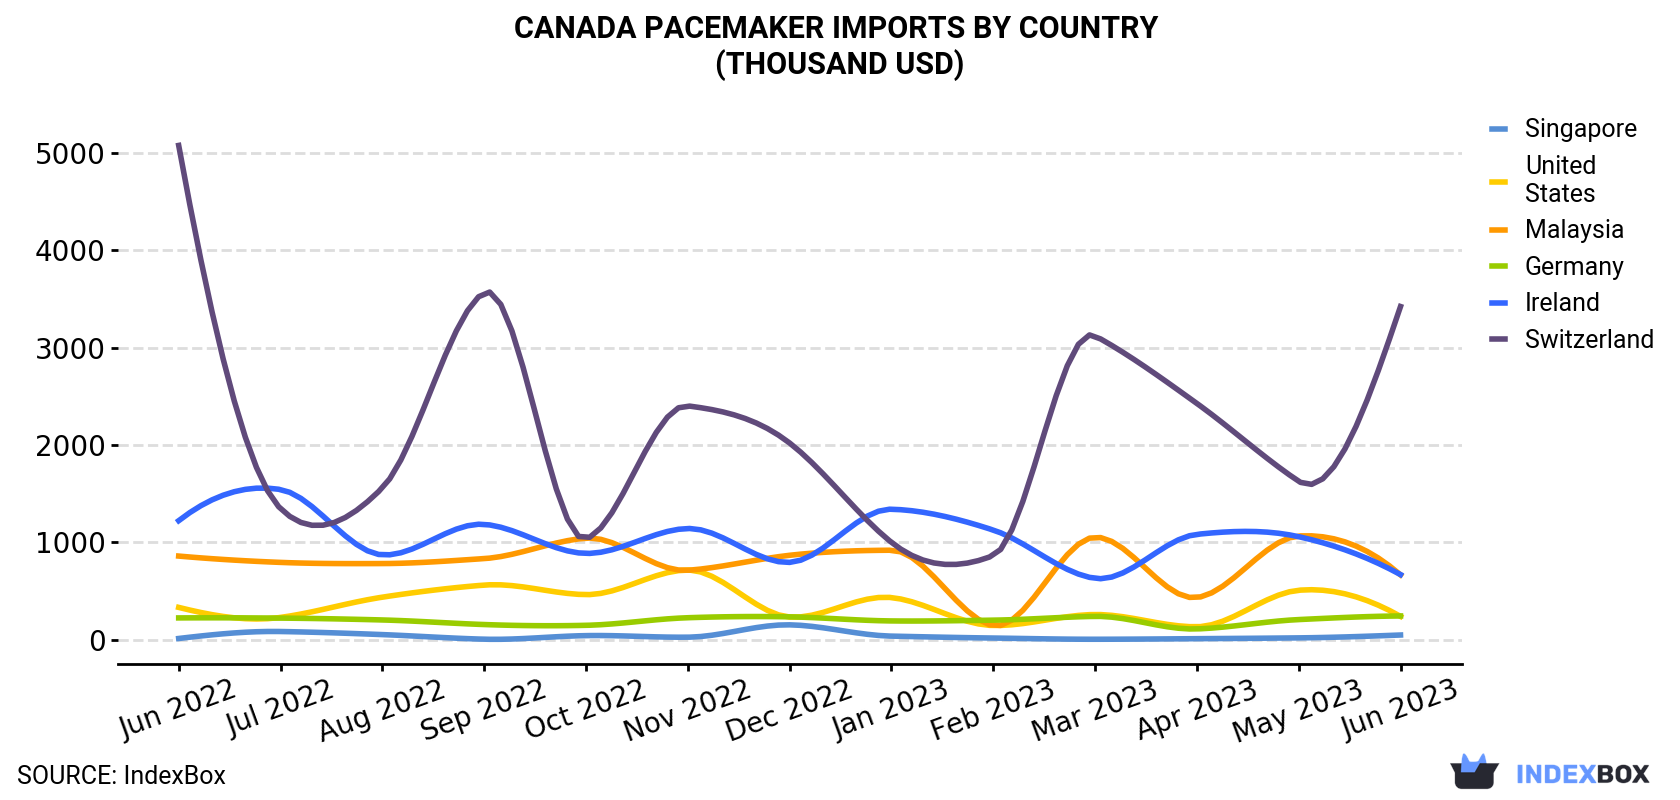 Canada Pacemaker Imports By Country (Thousand USD)